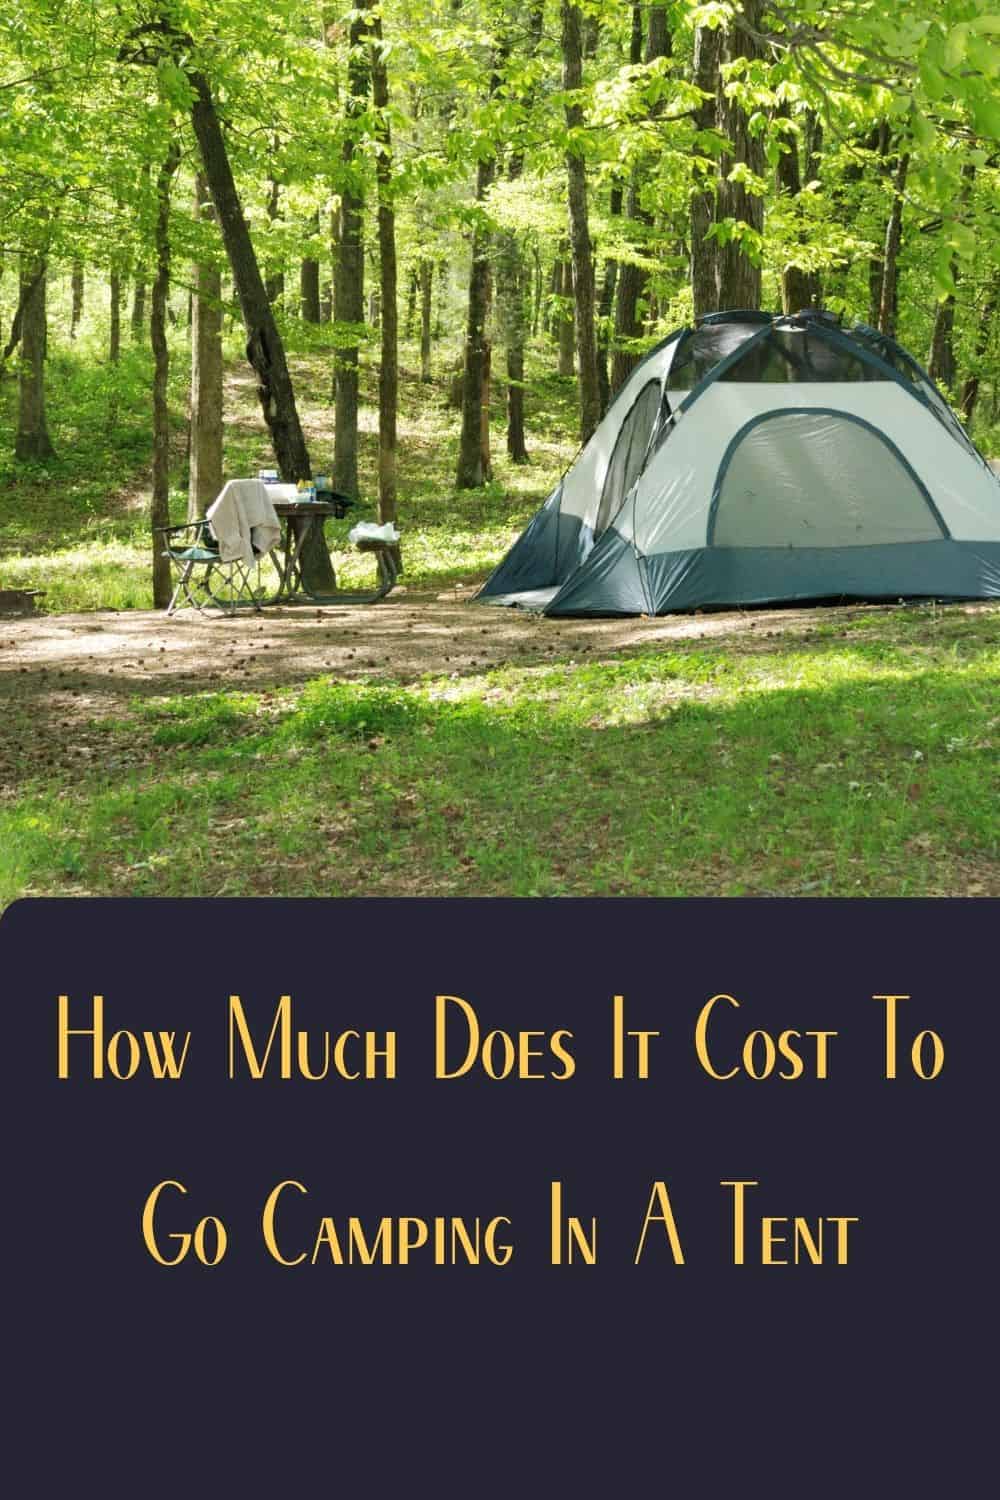 How Much Does It Cost To Go Camping In A Tent | Camping Tips From How Much Does It Cost To Go Camping